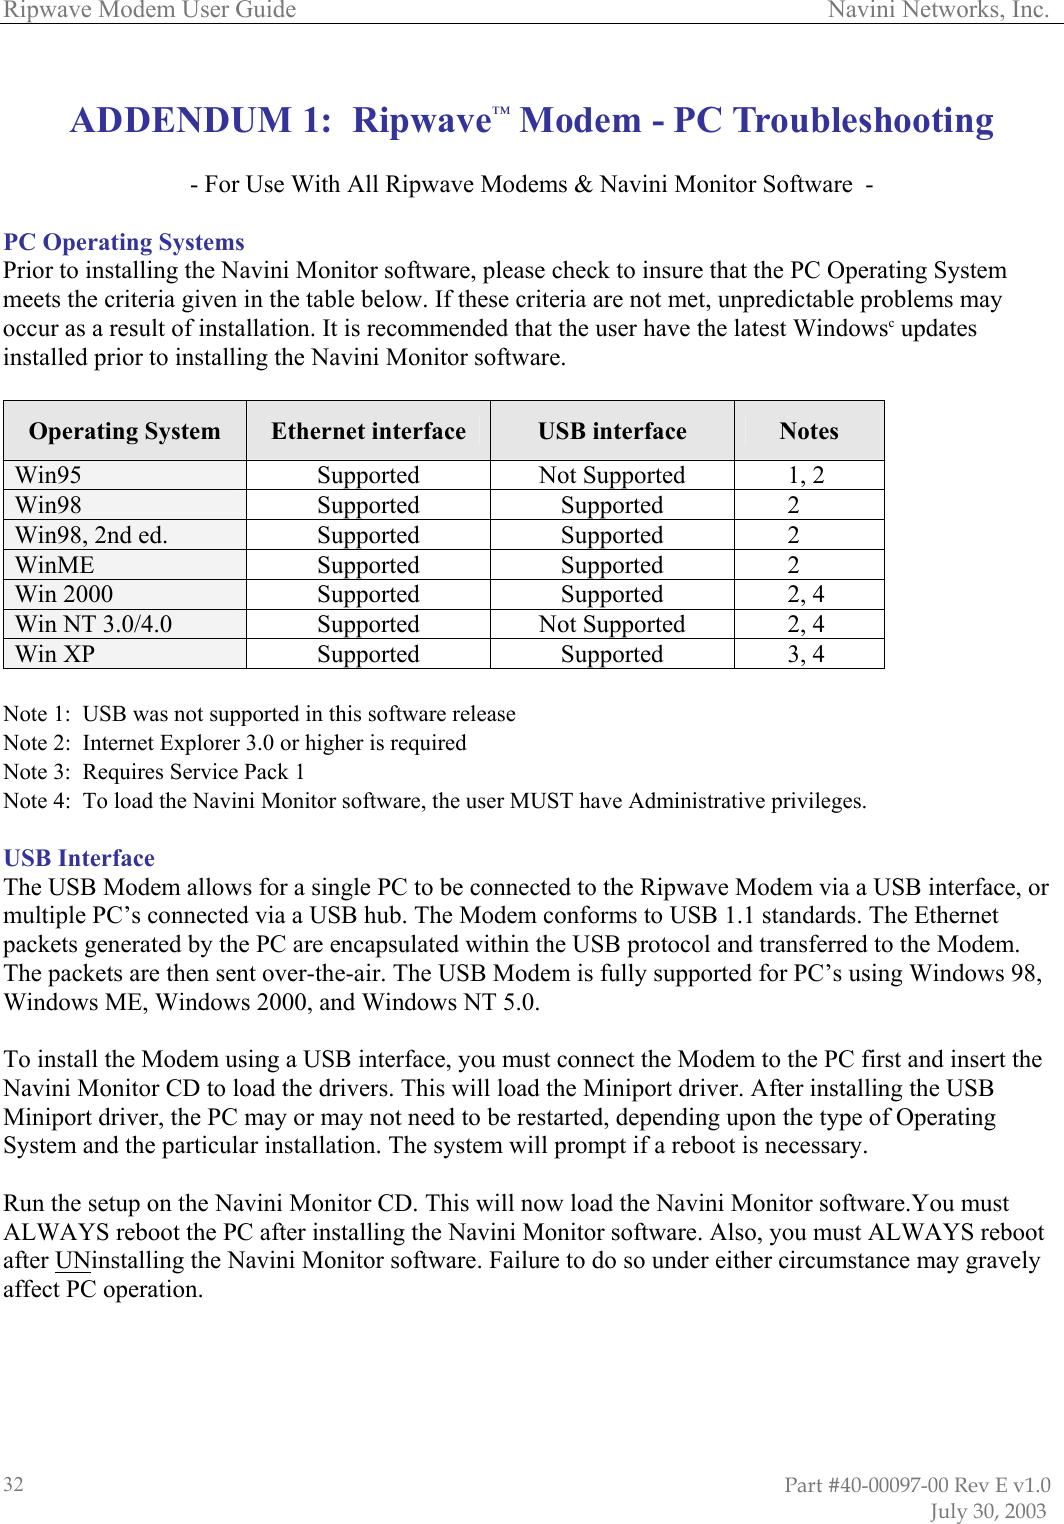 Ripwave Modem User Guide                                                                                     Navini Networks, Inc.                                                                                                                         Part #40-00097-00 Rev E v1.0                               July 30, 2003 32 ADDENDUM 1:  Ripwave™ Modem - PC Troubleshooting  - For Use With All Ripwave Modems &amp; Navini Monitor Software  -  PC Operating Systems Prior to installing the Navini Monitor software, please check to insure that the PC Operating System meets the criteria given in the table below. If these criteria are not met, unpredictable problems may occur as a result of installation. It is recommended that the user have the latest Windowsc updates installed prior to installing the Navini Monitor software.  Operating System  Ethernet interface  USB interface  Notes Win95  Supported  Not Supported  1, 2 Win98  Supported Supported 2 Win98, 2nd ed.  Supported Supported 2 WinME  Supported Supported 2 Win 2000  Supported Supported 2, 4 Win NT 3.0/4.0  Supported  Not Supported  2, 4 Win XP  Supported Supported 3, 4  Note 1:  USB was not supported in this software release Note 2:  Internet Explorer 3.0 or higher is required Note 3:  Requires Service Pack 1 Note 4:  To load the Navini Monitor software, the user MUST have Administrative privileges.  USB Interface The USB Modem allows for a single PC to be connected to the Ripwave Modem via a USB interface, or multiple PC’s connected via a USB hub. The Modem conforms to USB 1.1 standards. The Ethernet packets generated by the PC are encapsulated within the USB protocol and transferred to the Modem. The packets are then sent over-the-air. The USB Modem is fully supported for PC’s using Windows 98, Windows ME, Windows 2000, and Windows NT 5.0.  To install the Modem using a USB interface, you must connect the Modem to the PC first and insert the Navini Monitor CD to load the drivers. This will load the Miniport driver. After installing the USB Miniport driver, the PC may or may not need to be restarted, depending upon the type of Operating System and the particular installation. The system will prompt if a reboot is necessary.   Run the setup on the Navini Monitor CD. This will now load the Navini Monitor software.You must ALWAYS reboot the PC after installing the Navini Monitor software. Also, you must ALWAYS reboot after UNinstalling the Navini Monitor software. Failure to do so under either circumstance may gravely affect PC operation.     